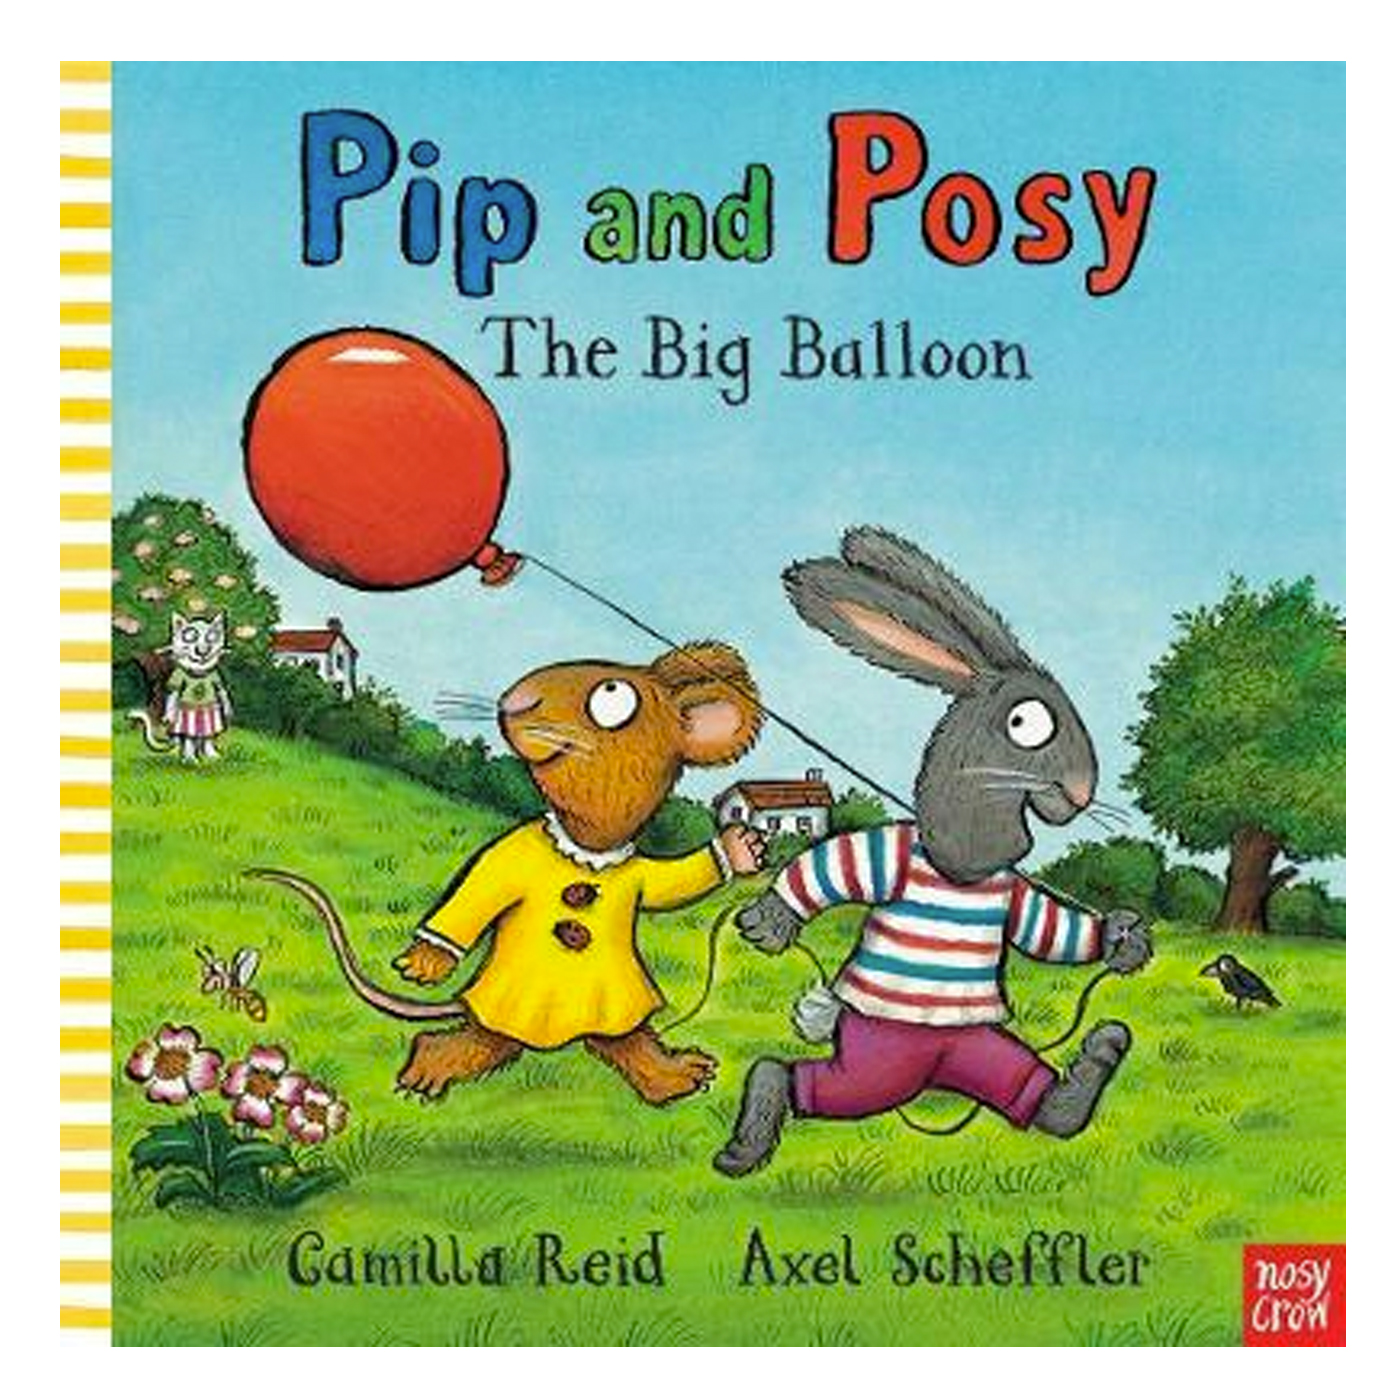  Pip and Posy: The Big Balloon